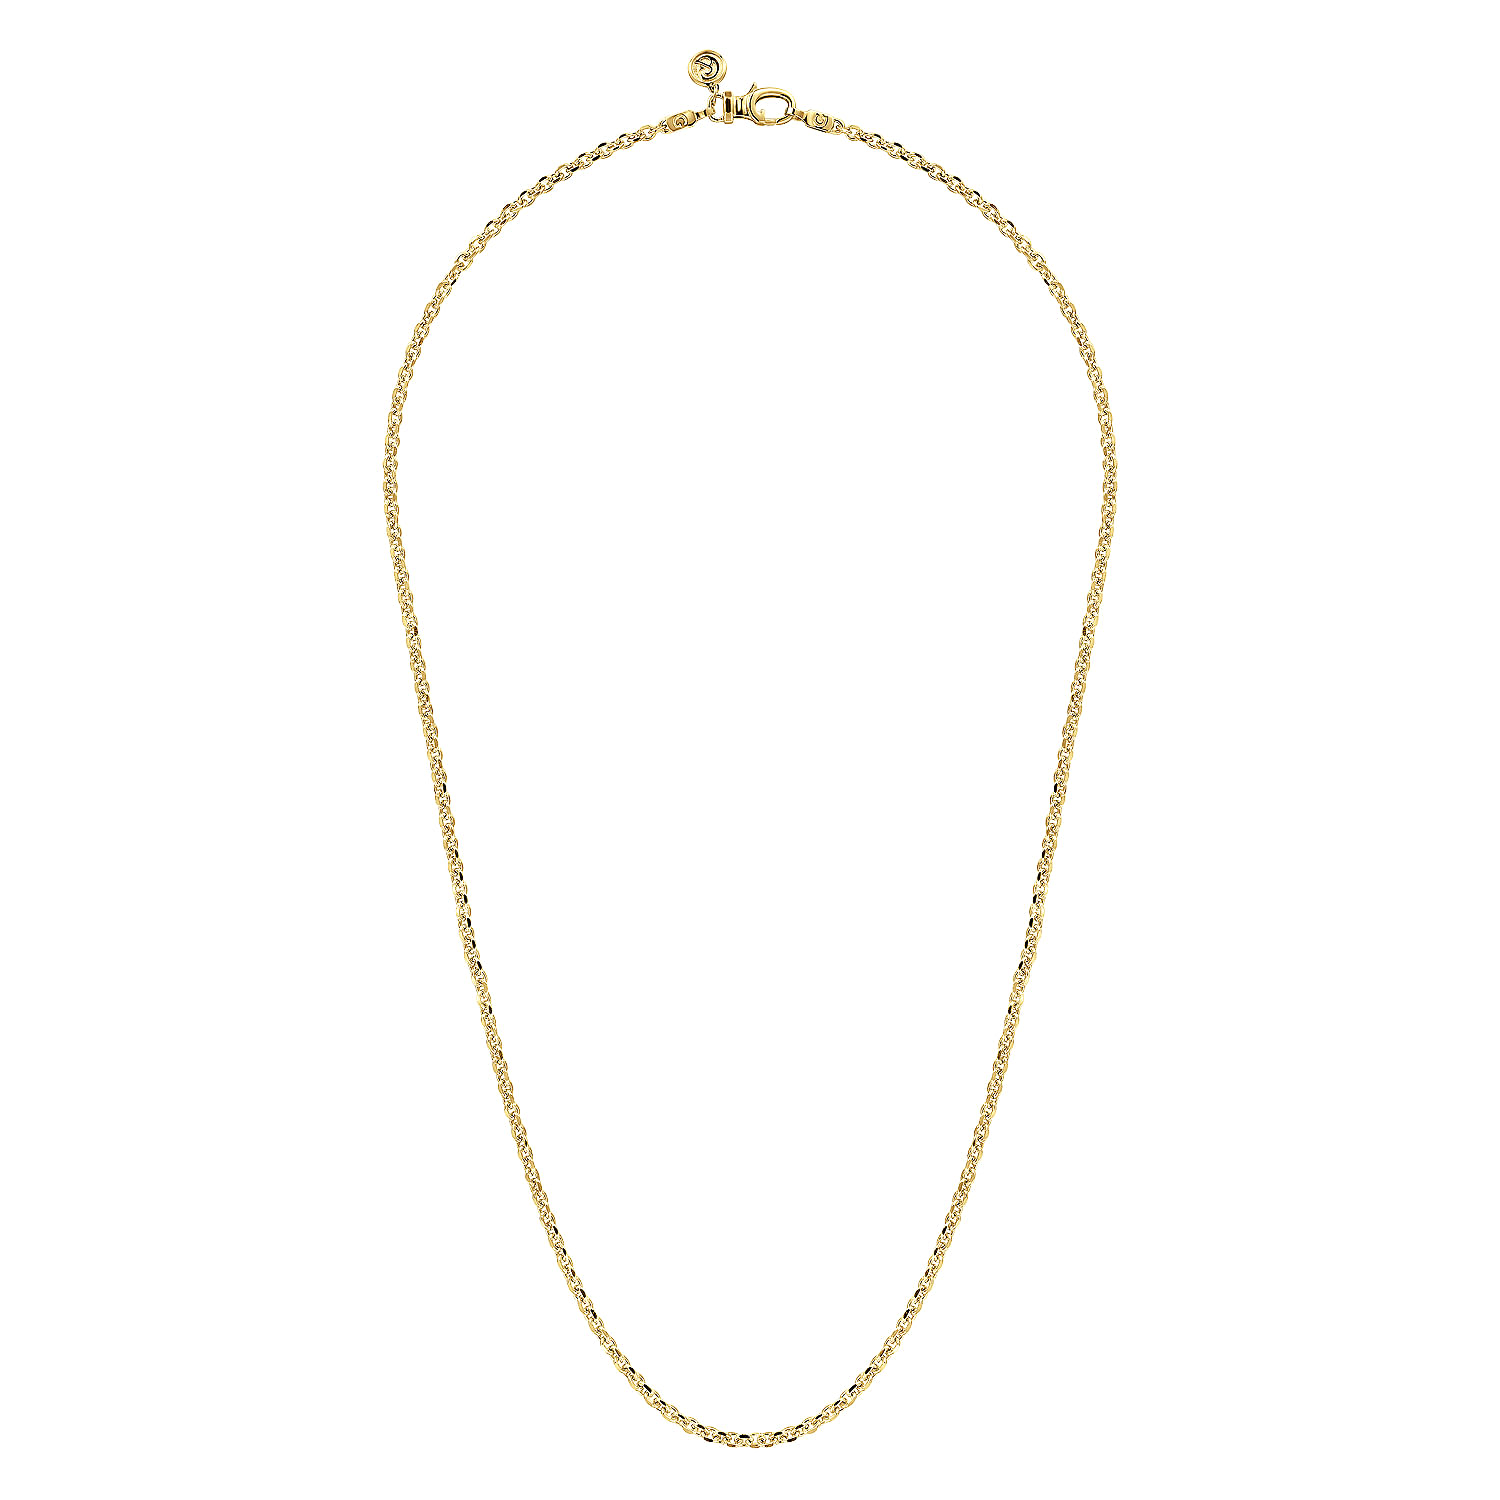 22-Inch-14K-Yellow-Gold-Hollow-Men's-Link-Chain-Necklace2